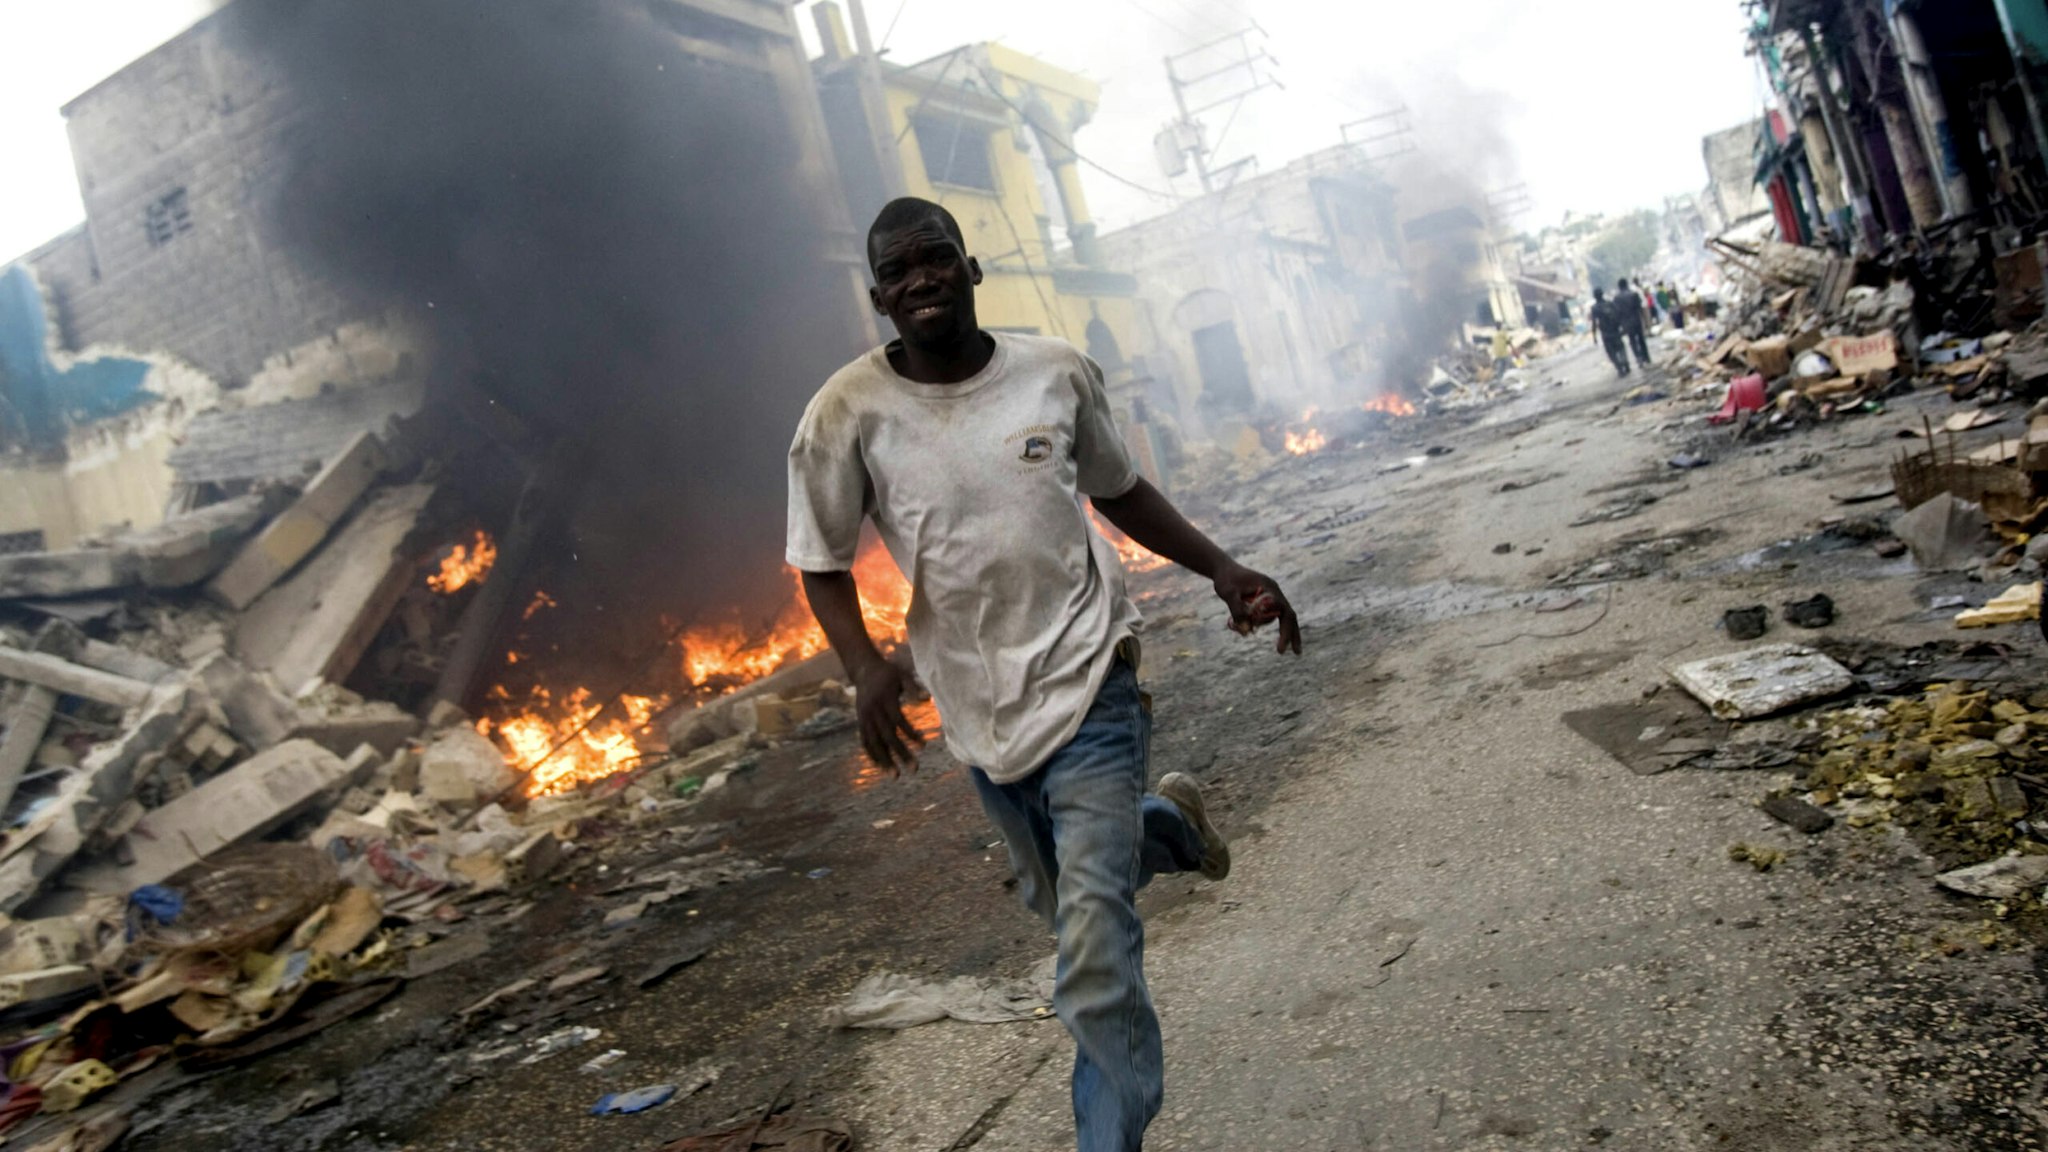 PORT-AU-PRINCE, HAITI - JANUARY 25: In this handout image provided by the United Nations Stabilization Mission in Haiti (MINUSTAH), A man runs besides a fire in downtown on January 25, 2010 in Port-au-Prince, Haiti. Haiti is trying to recover from a powerful 7.0-strong earthquake that struck on January 12 and devastated the country, displacing millions and killing tens of thousands.